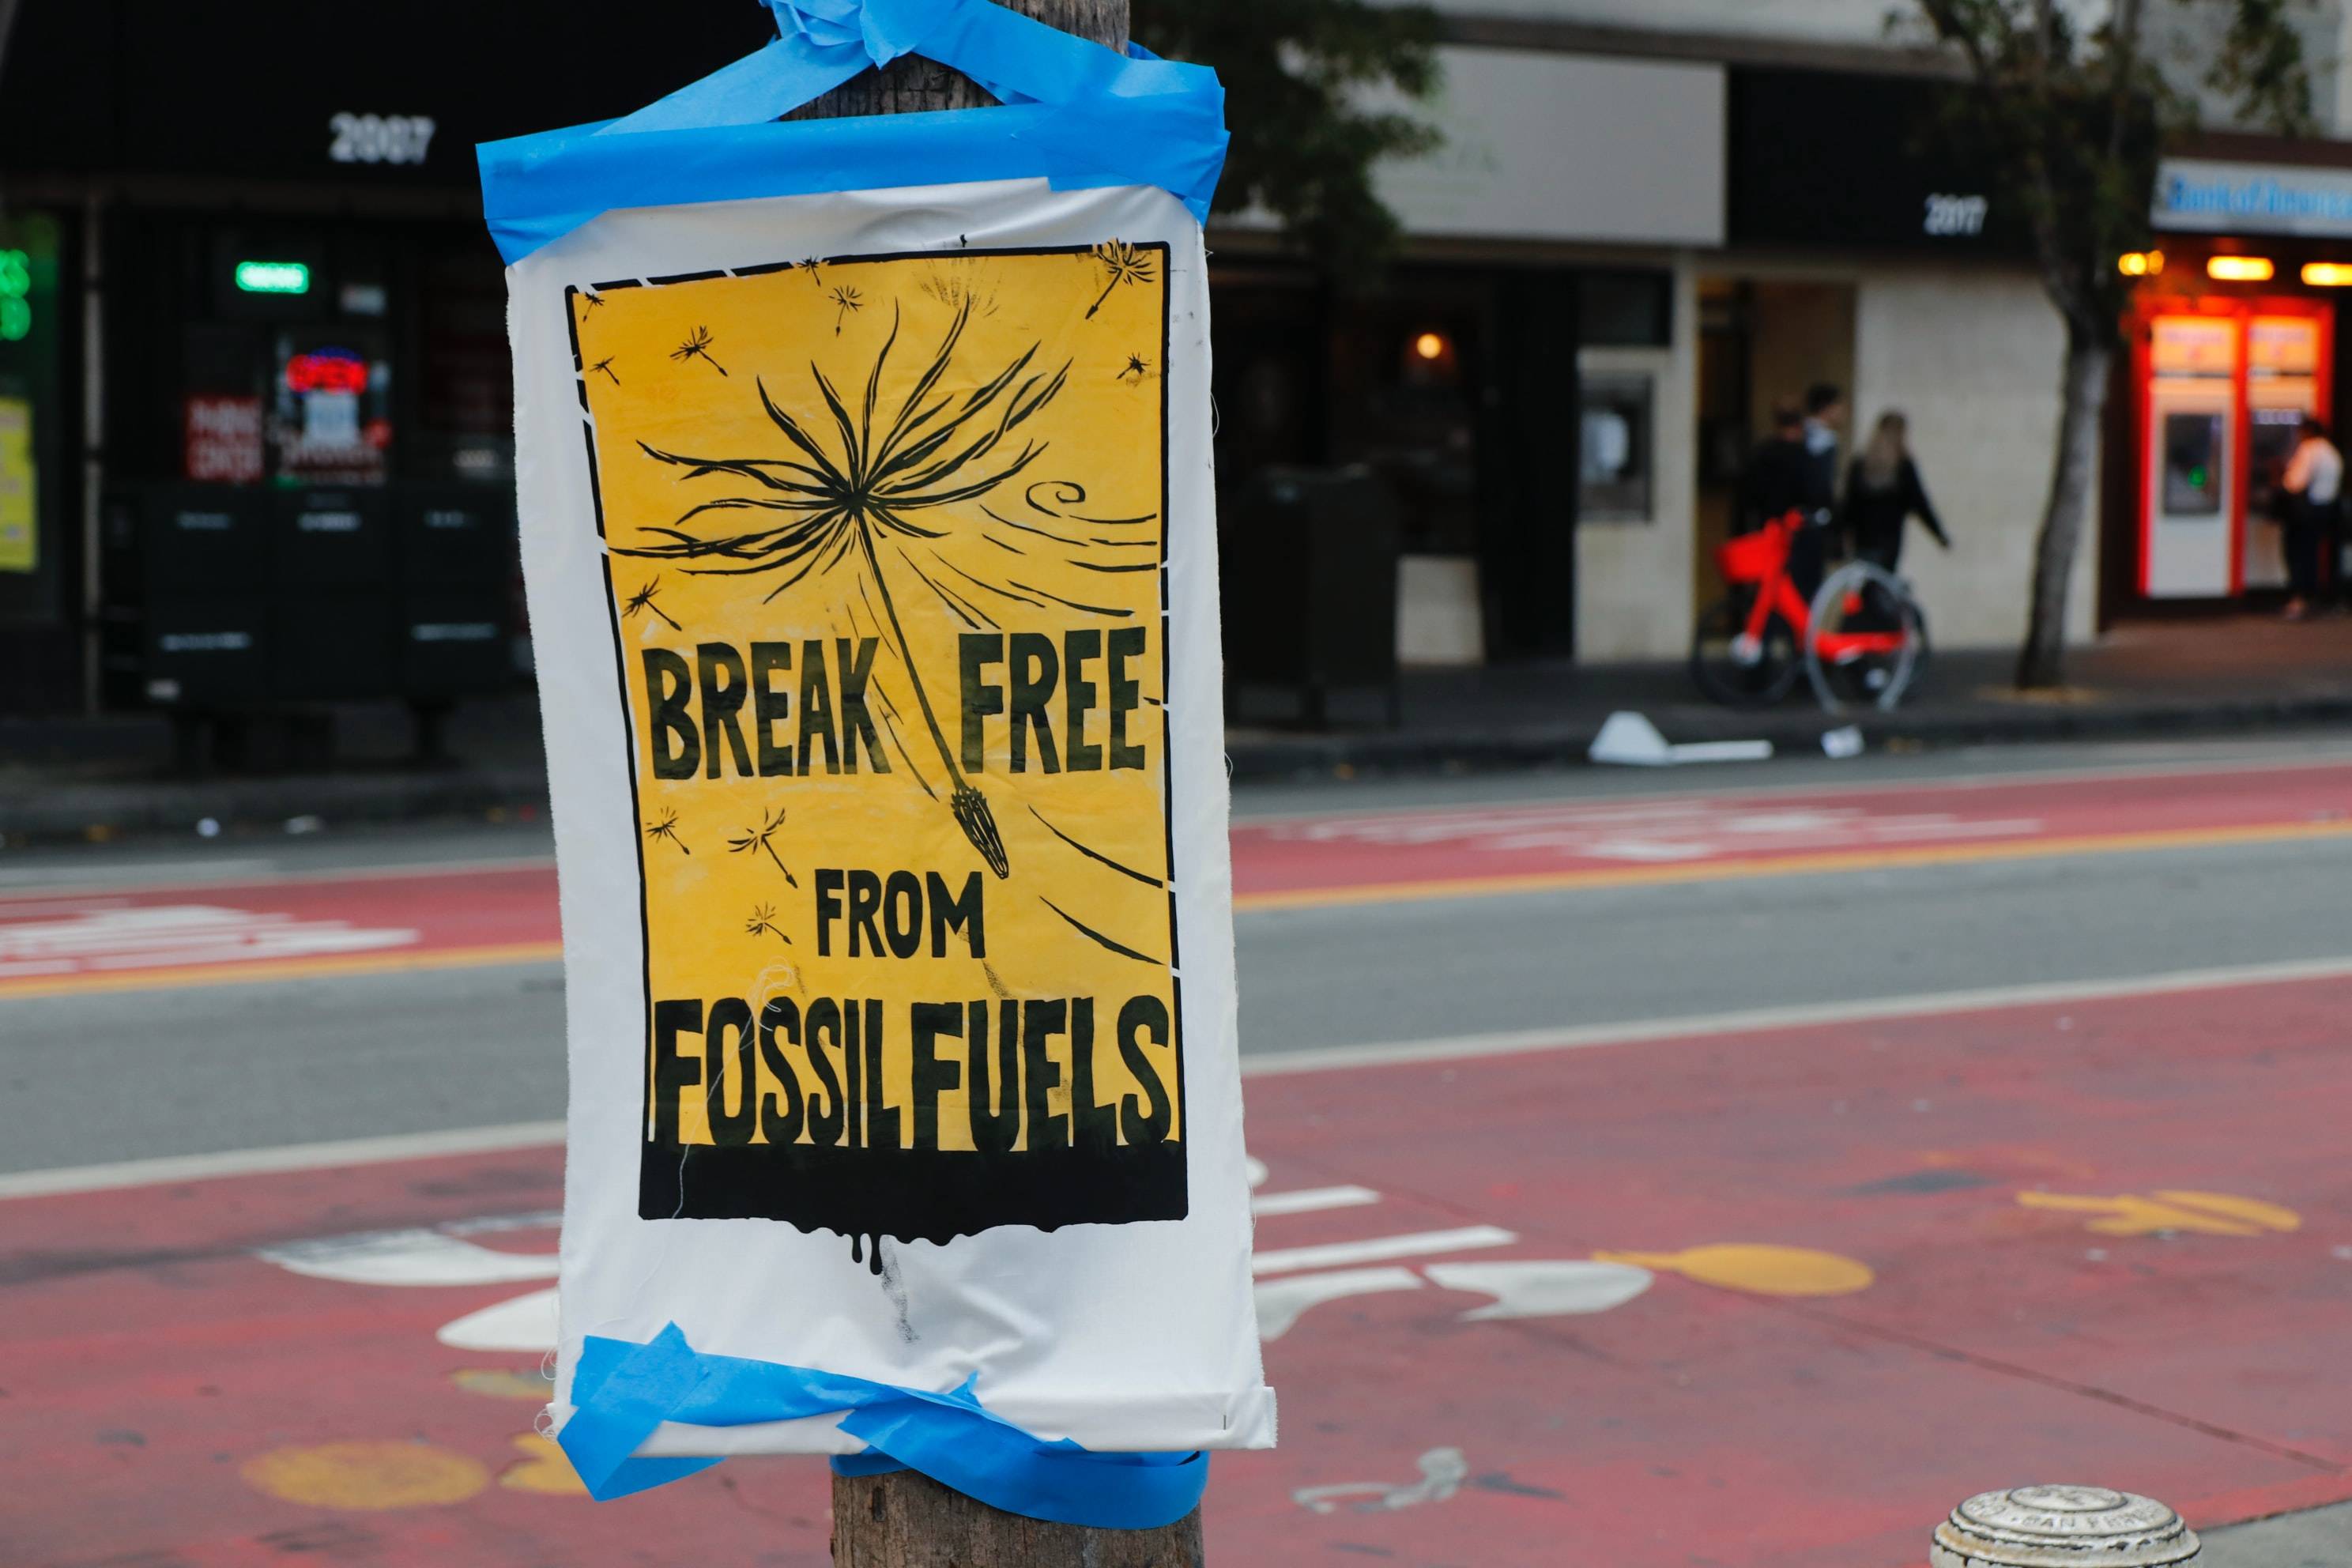 Learn about France's recent ban on fossil fuel ads and what that could mean for the economy.